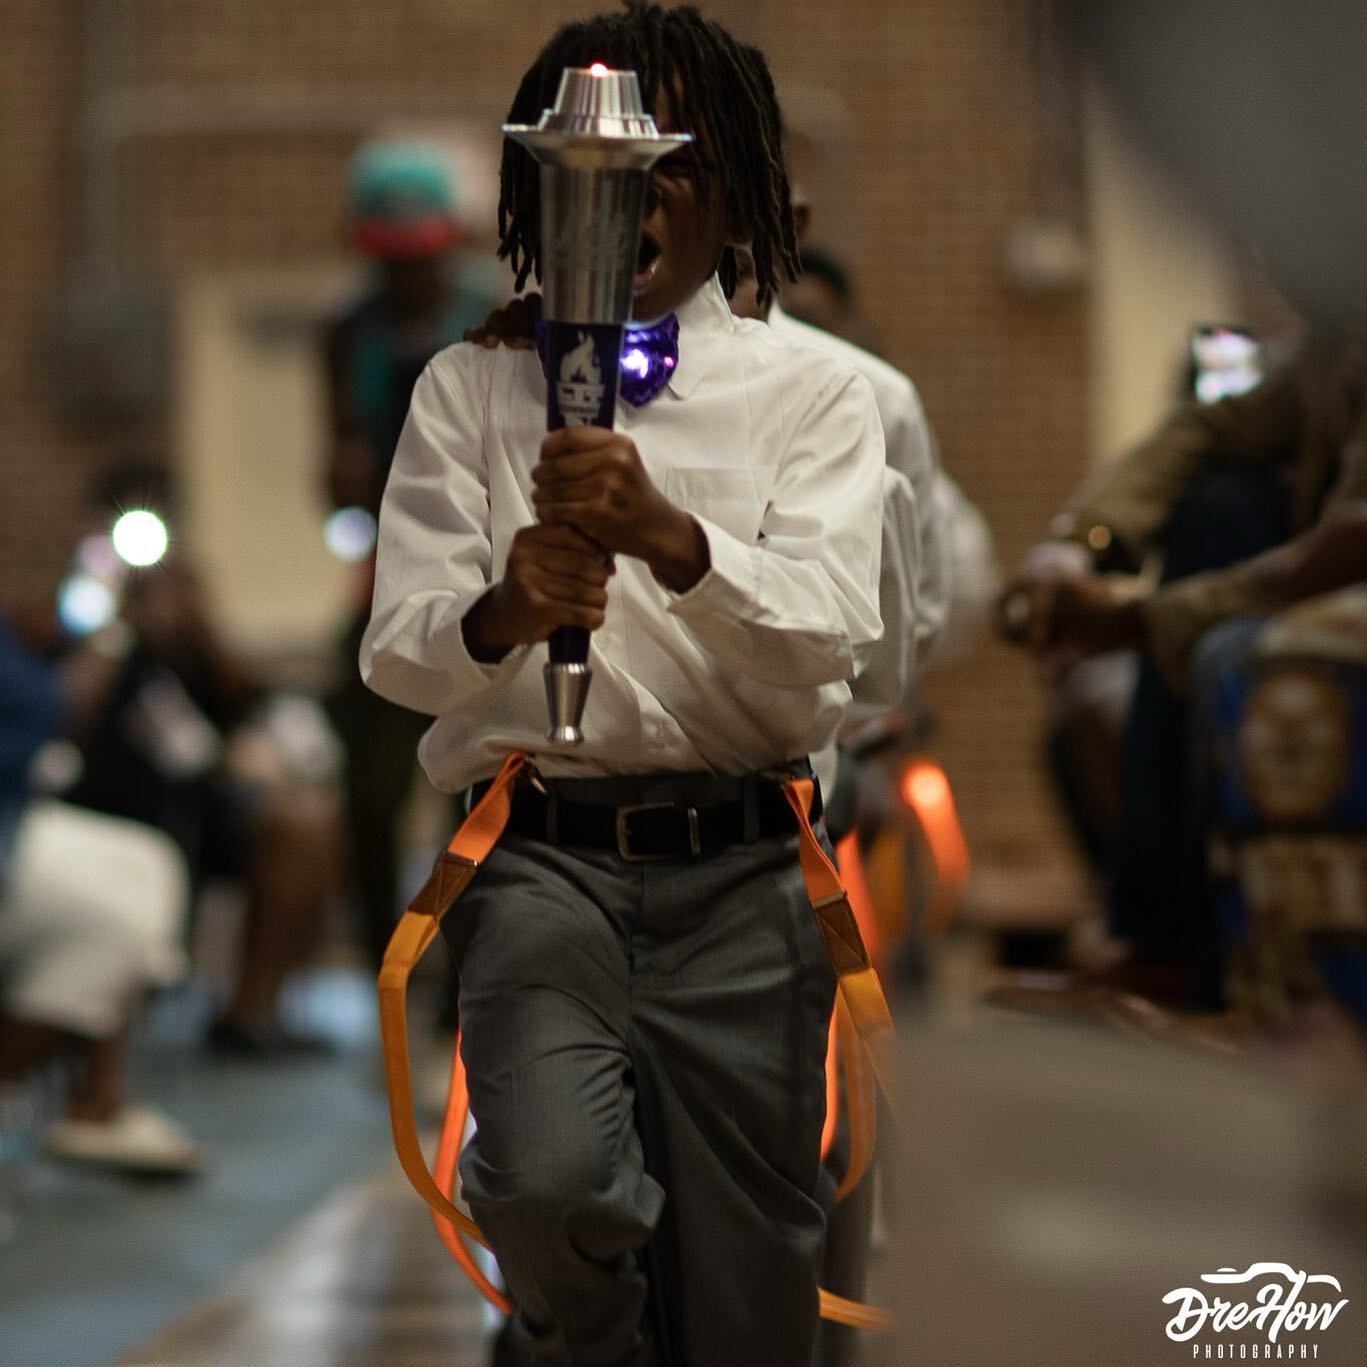 It just got 🥵 🔥 🗽
📸 @drehowphotography 
#weLeadTheWay #OmegaLamplighters #JuniorLamplighters #LITLamplighters #CrownsOnly👑💜 #Light⚡️Team #DaVillage #OLL #JLL #LLL #FLL